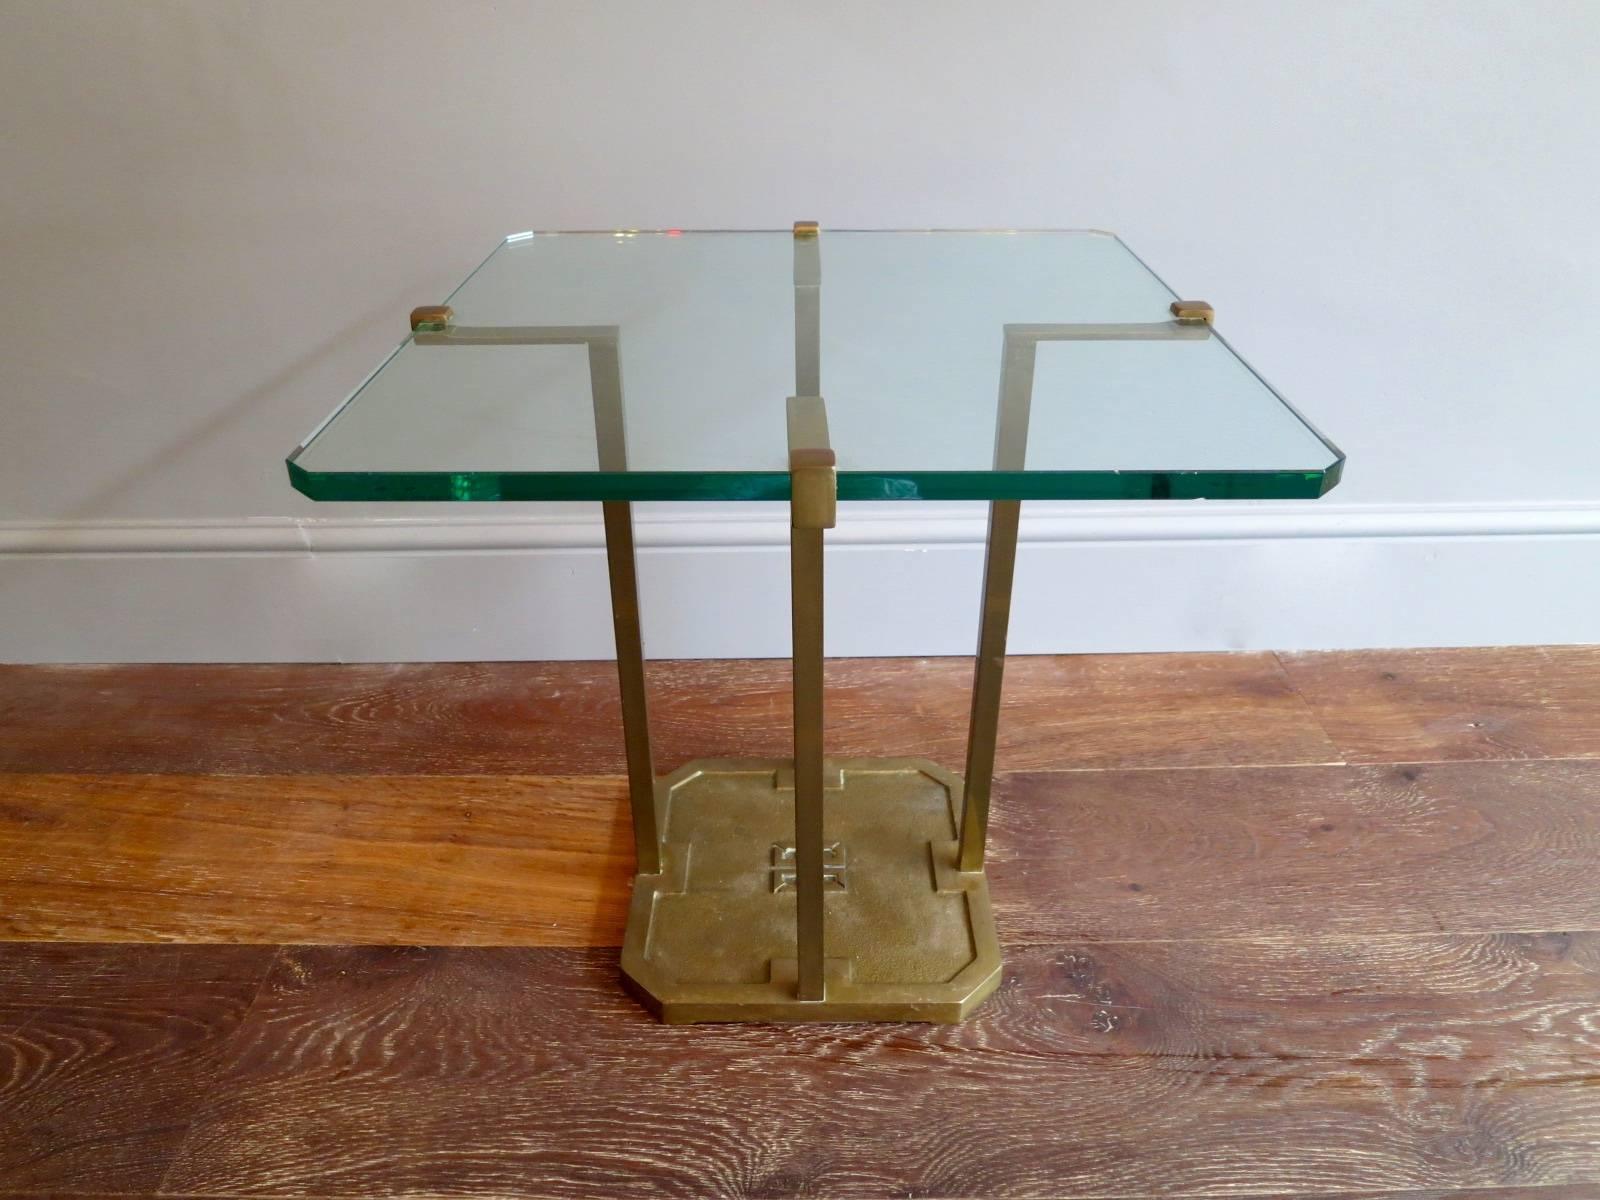 An architectural designed table, using quality materials with the Ghyczy emblem in the brass base and a thick glass shaped top.

